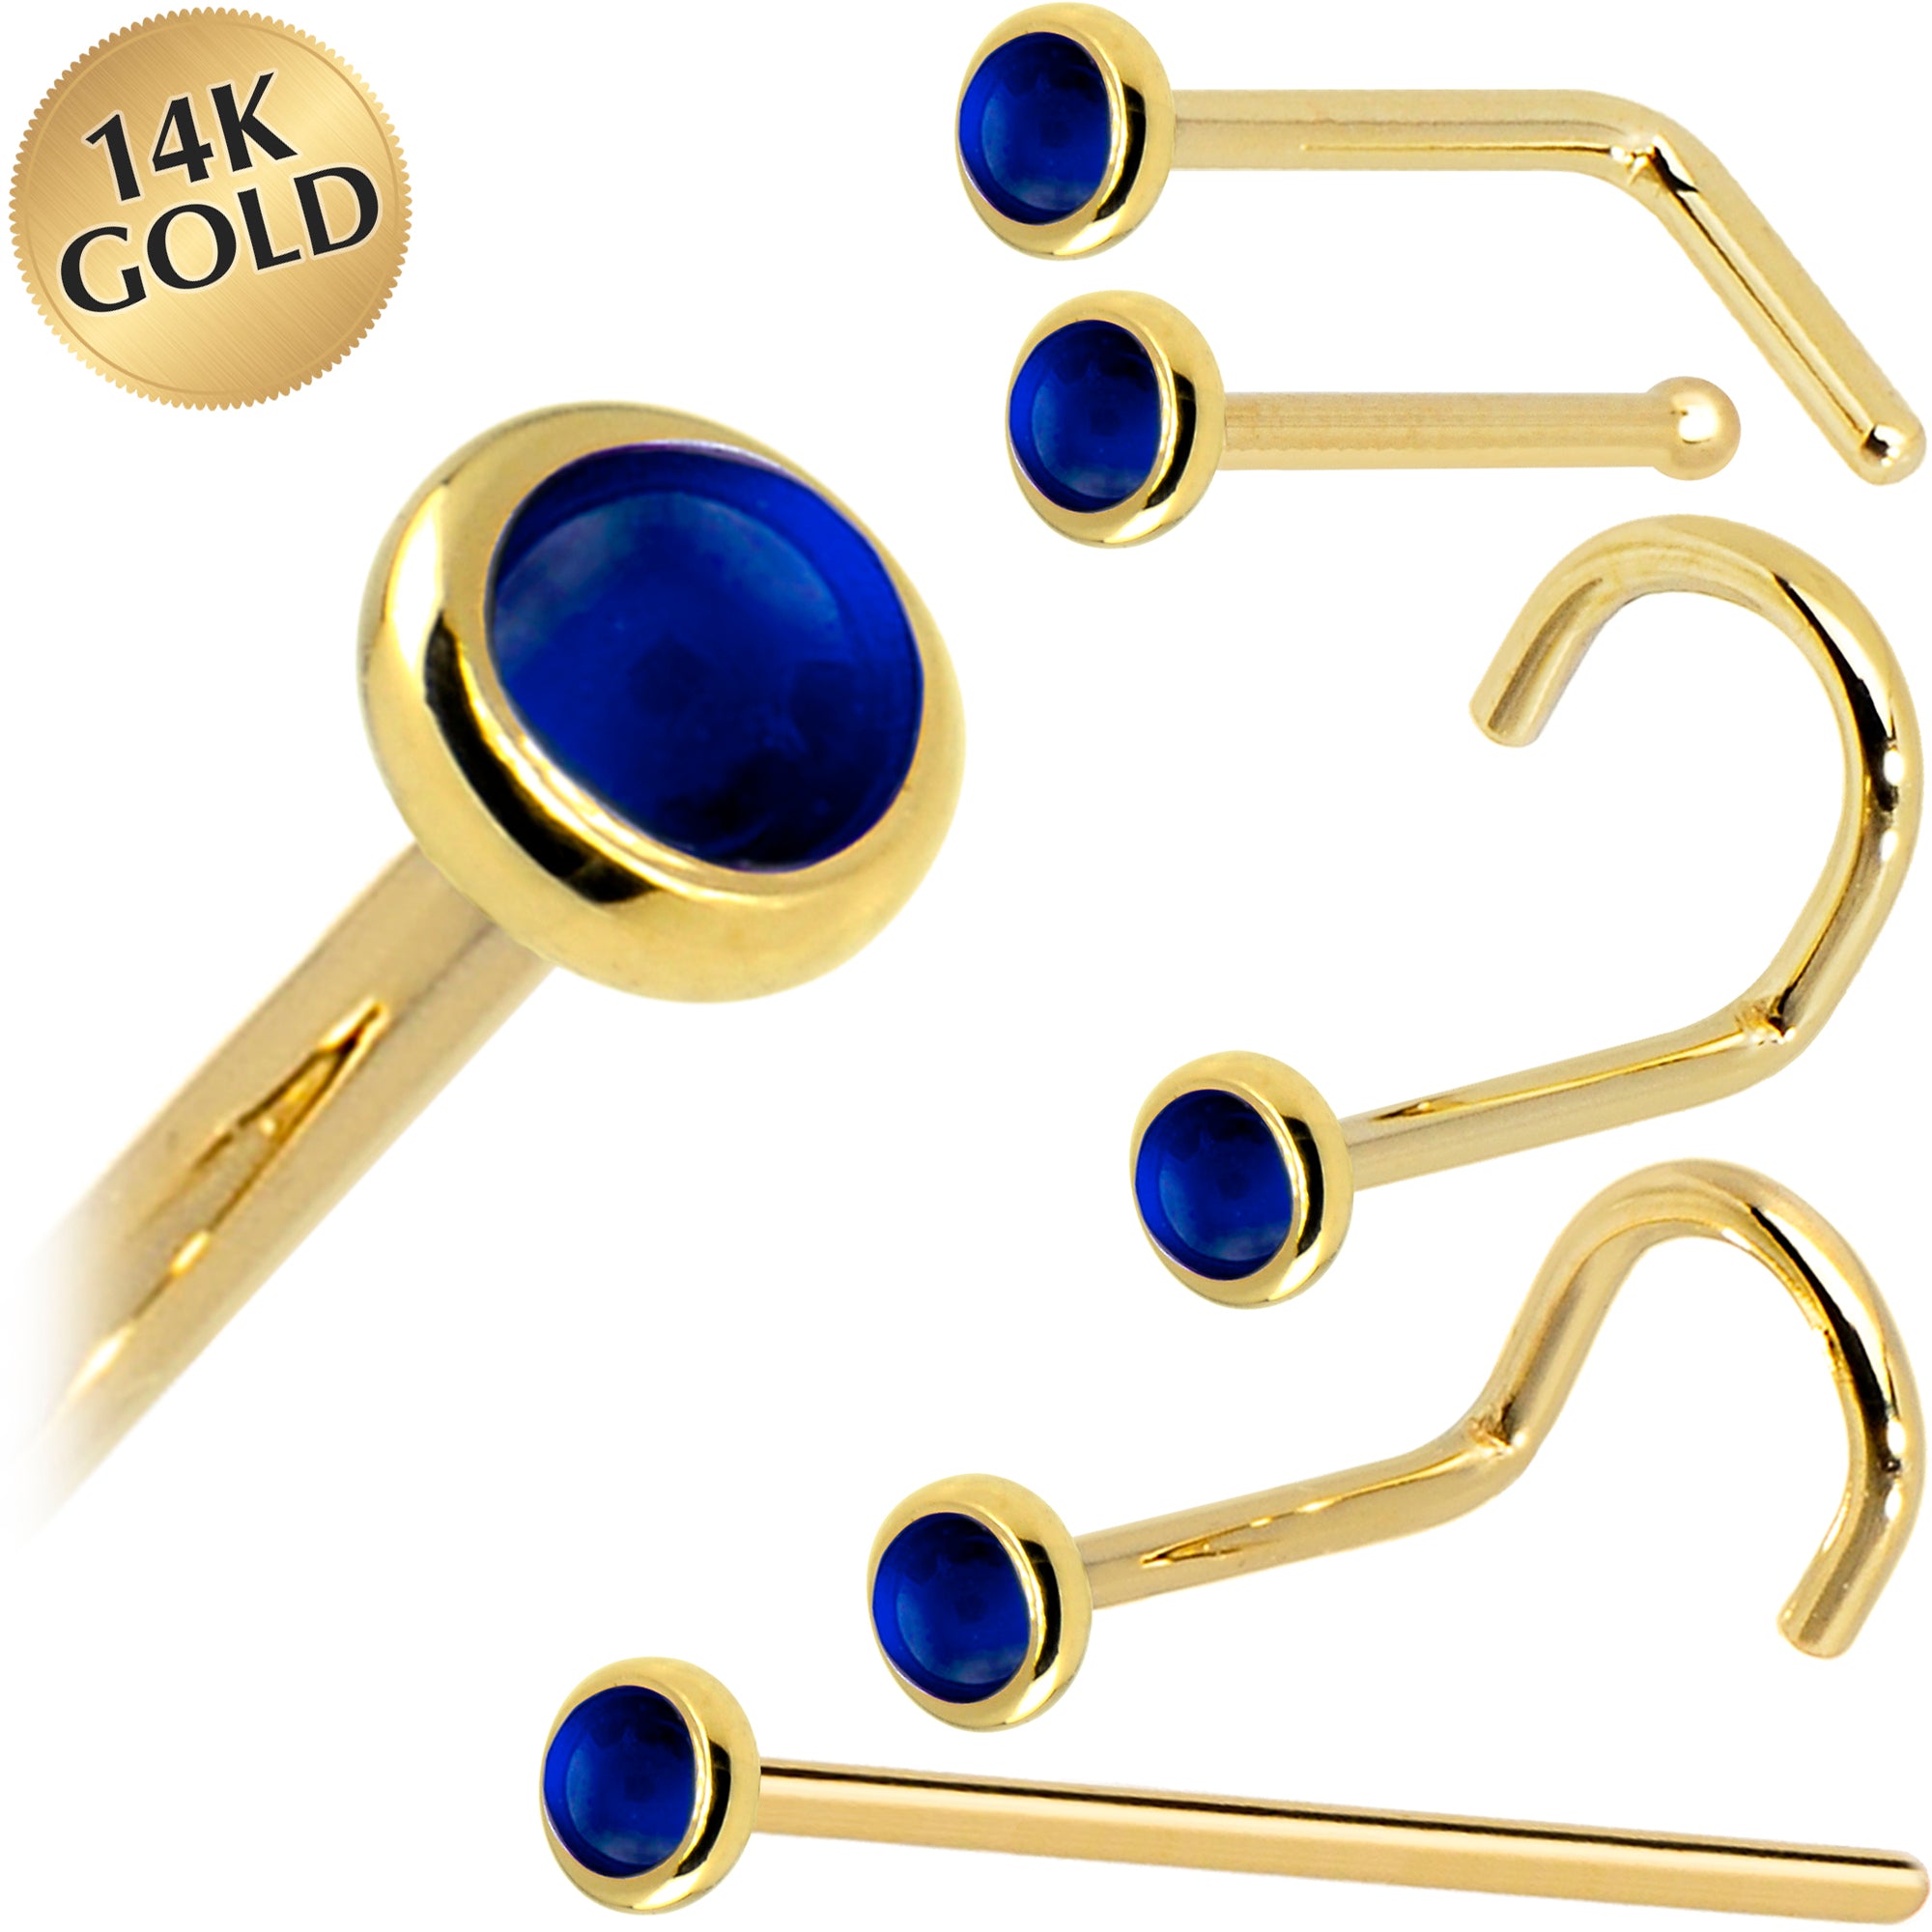 Solid 14KT Yellow Gold (September) 2mm Genuine Sapphire Nose Ring